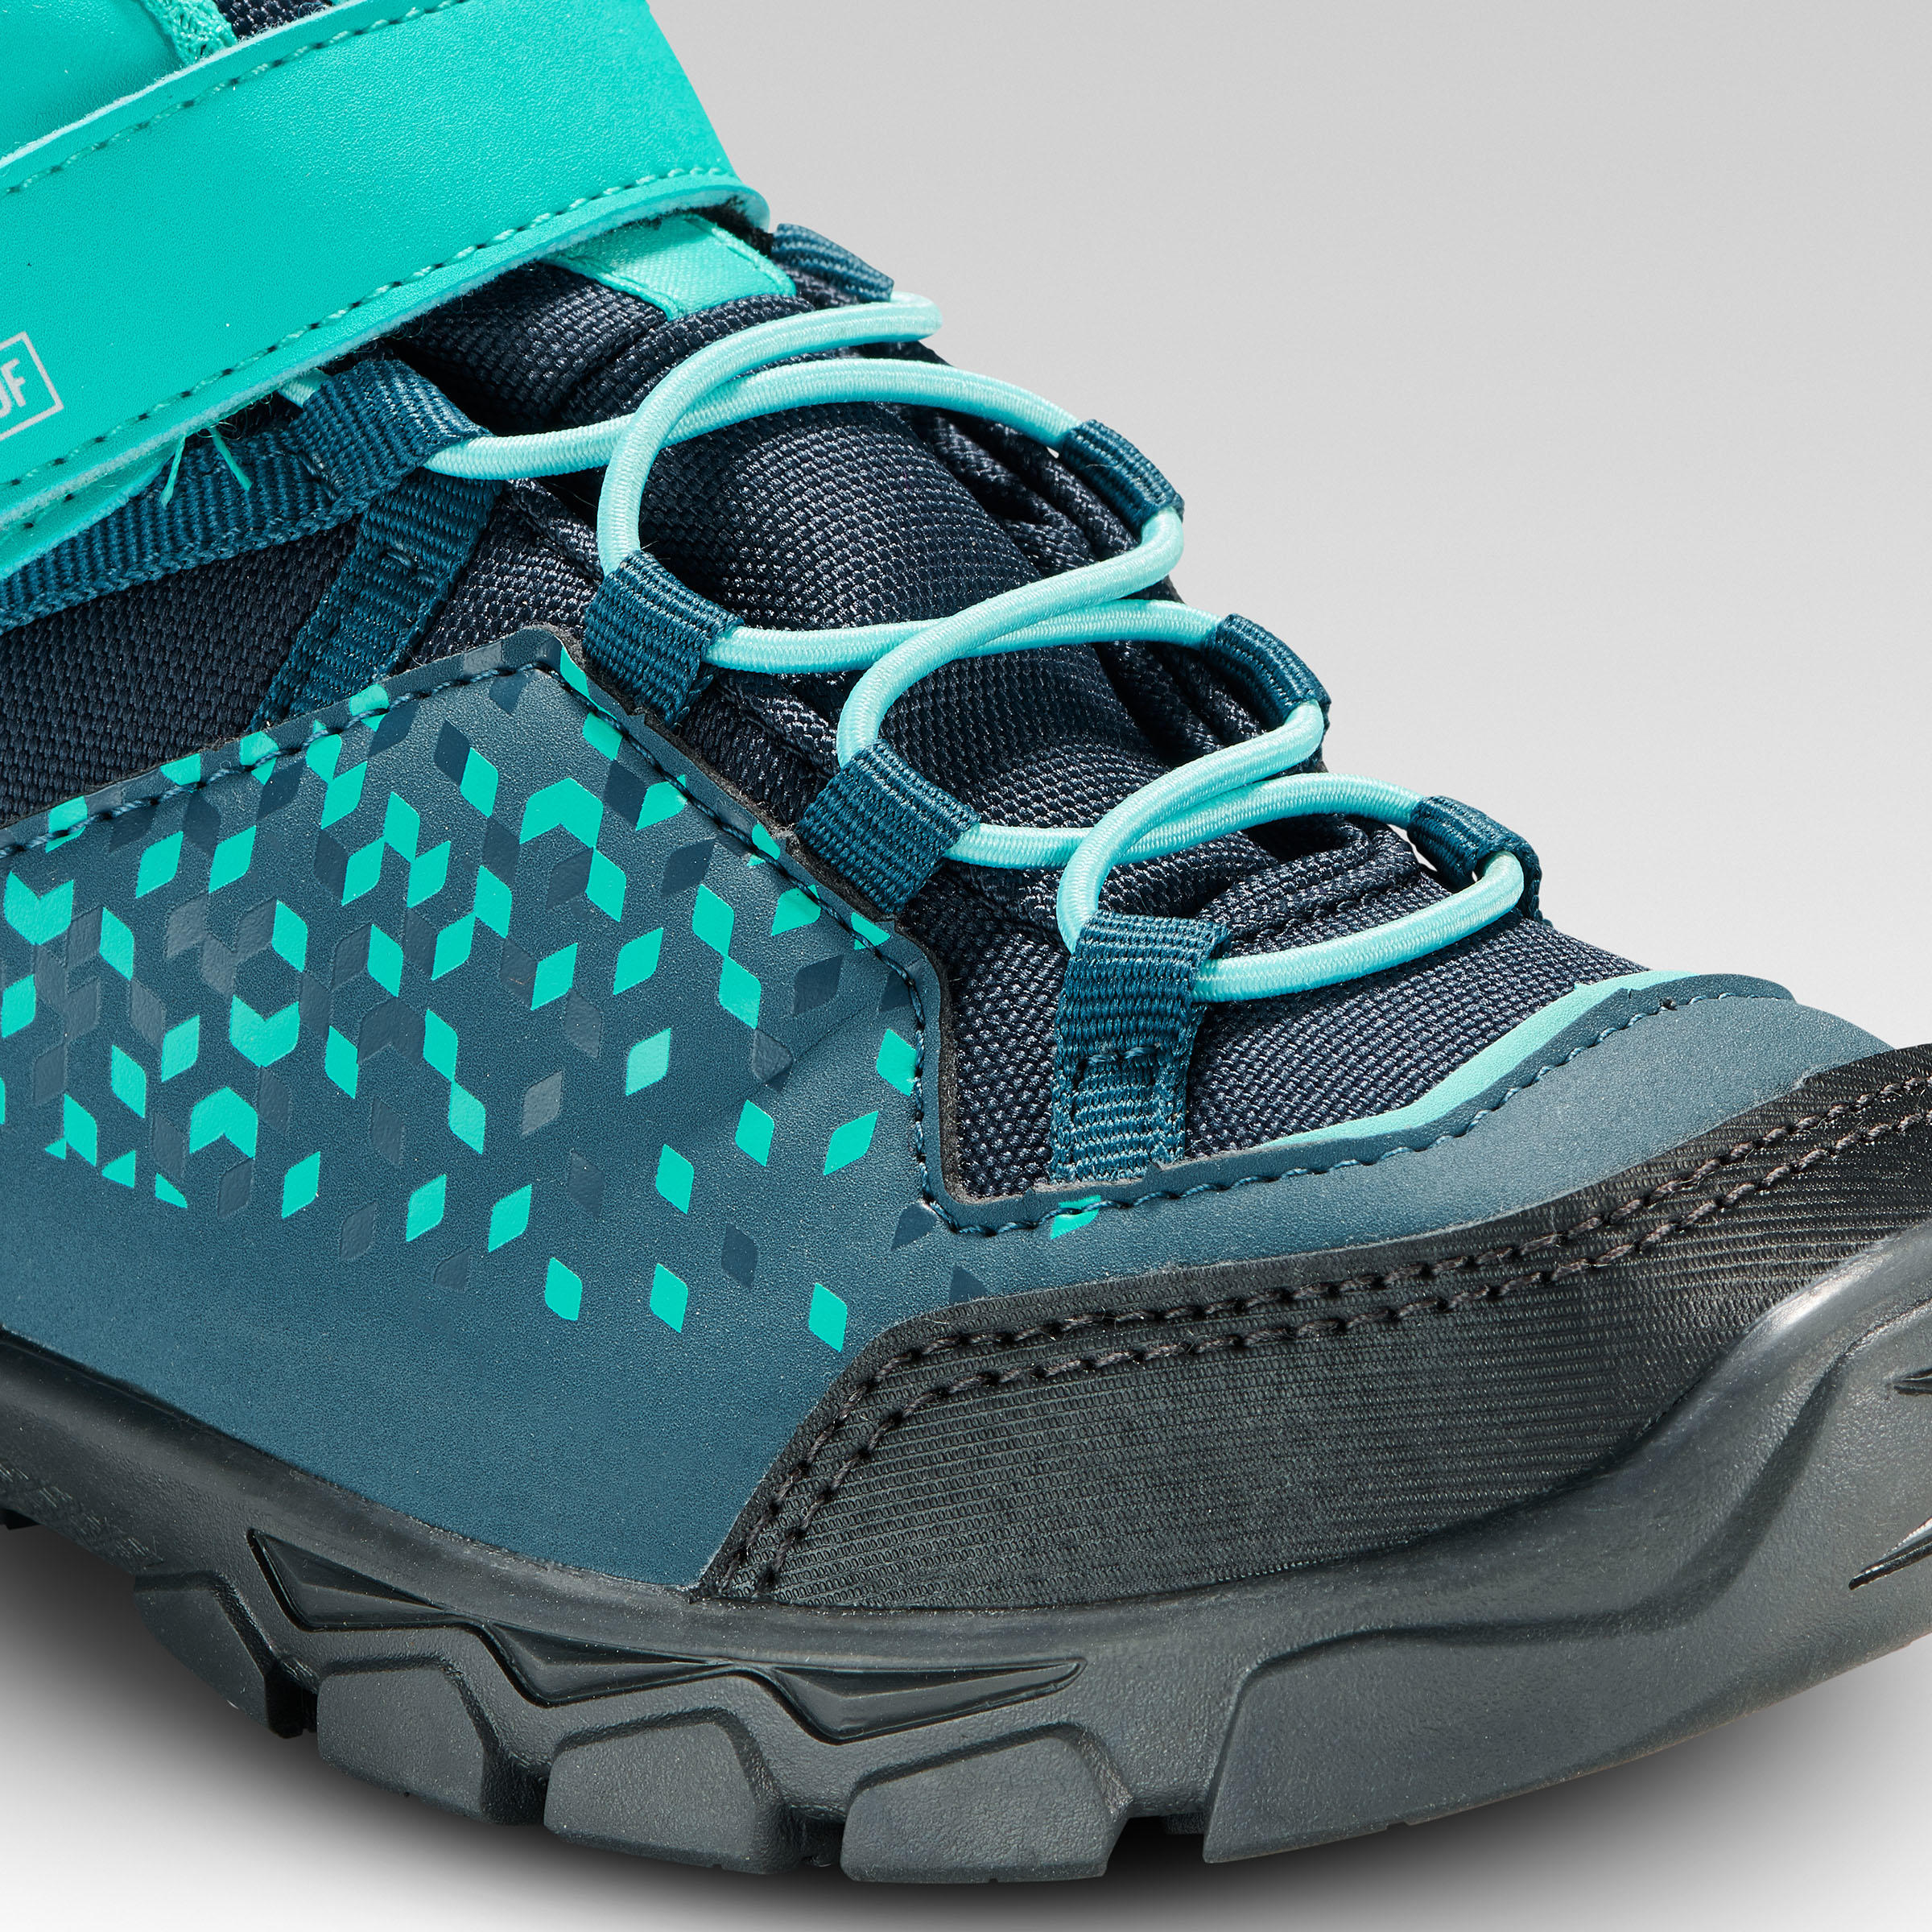 Kids’ Waterproof Hiking Shoes - MH120 MID 28 TO 34 - Turquoise 6/6